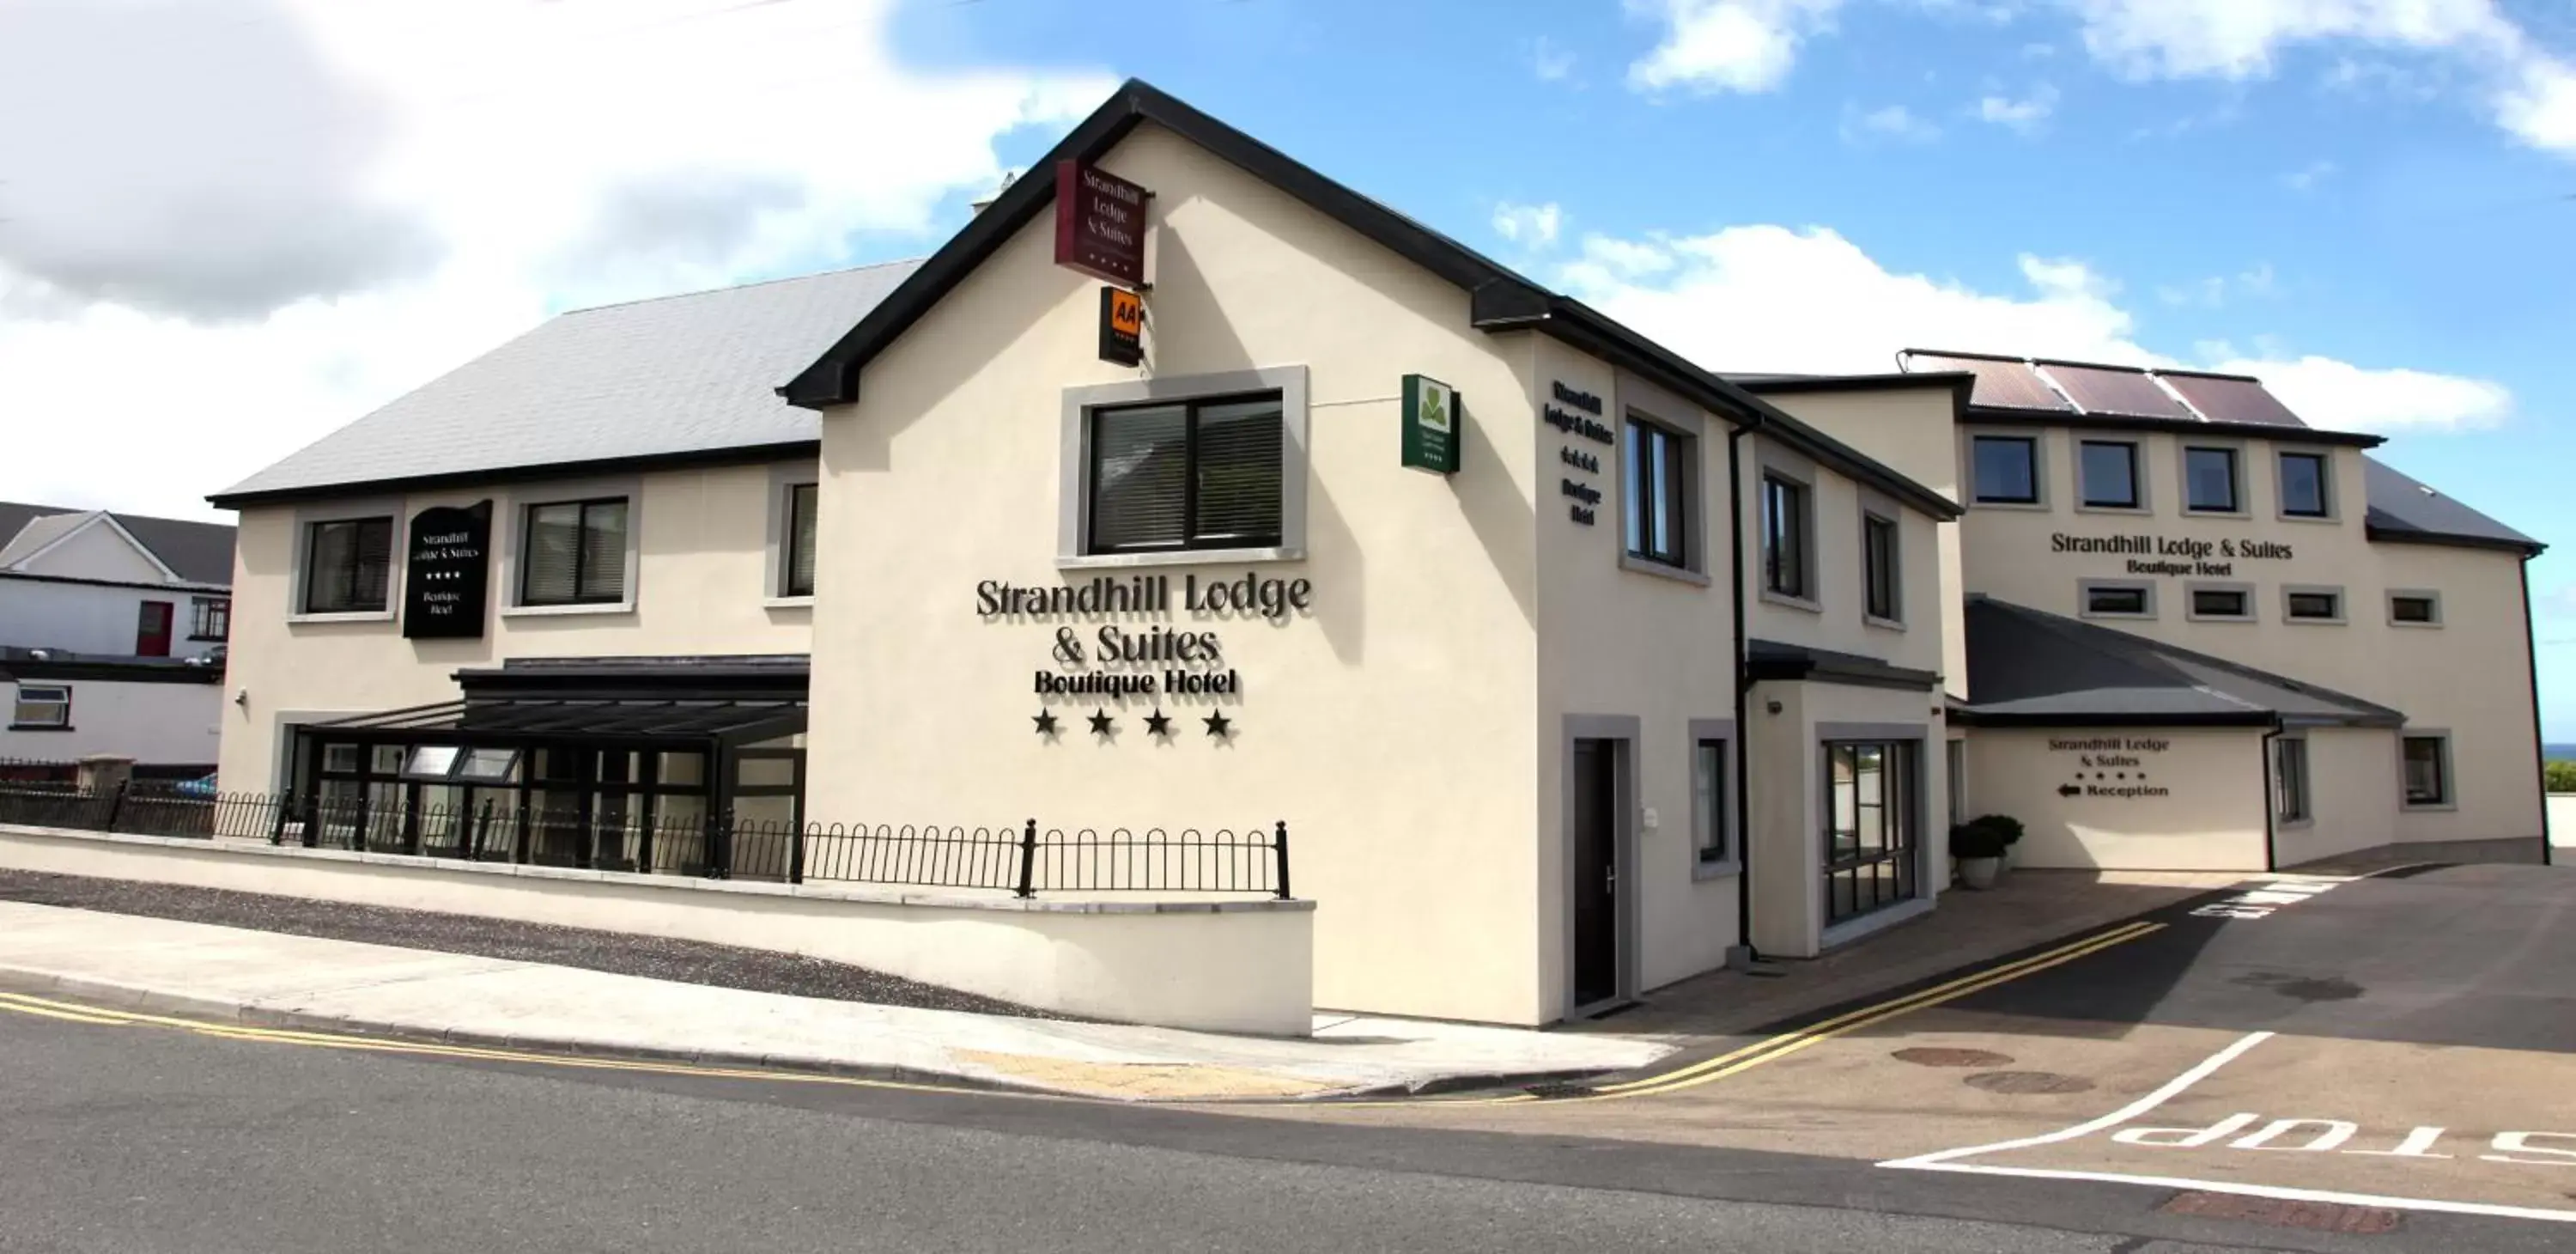 Street view, Property Building in Strandhill Lodge and Suites